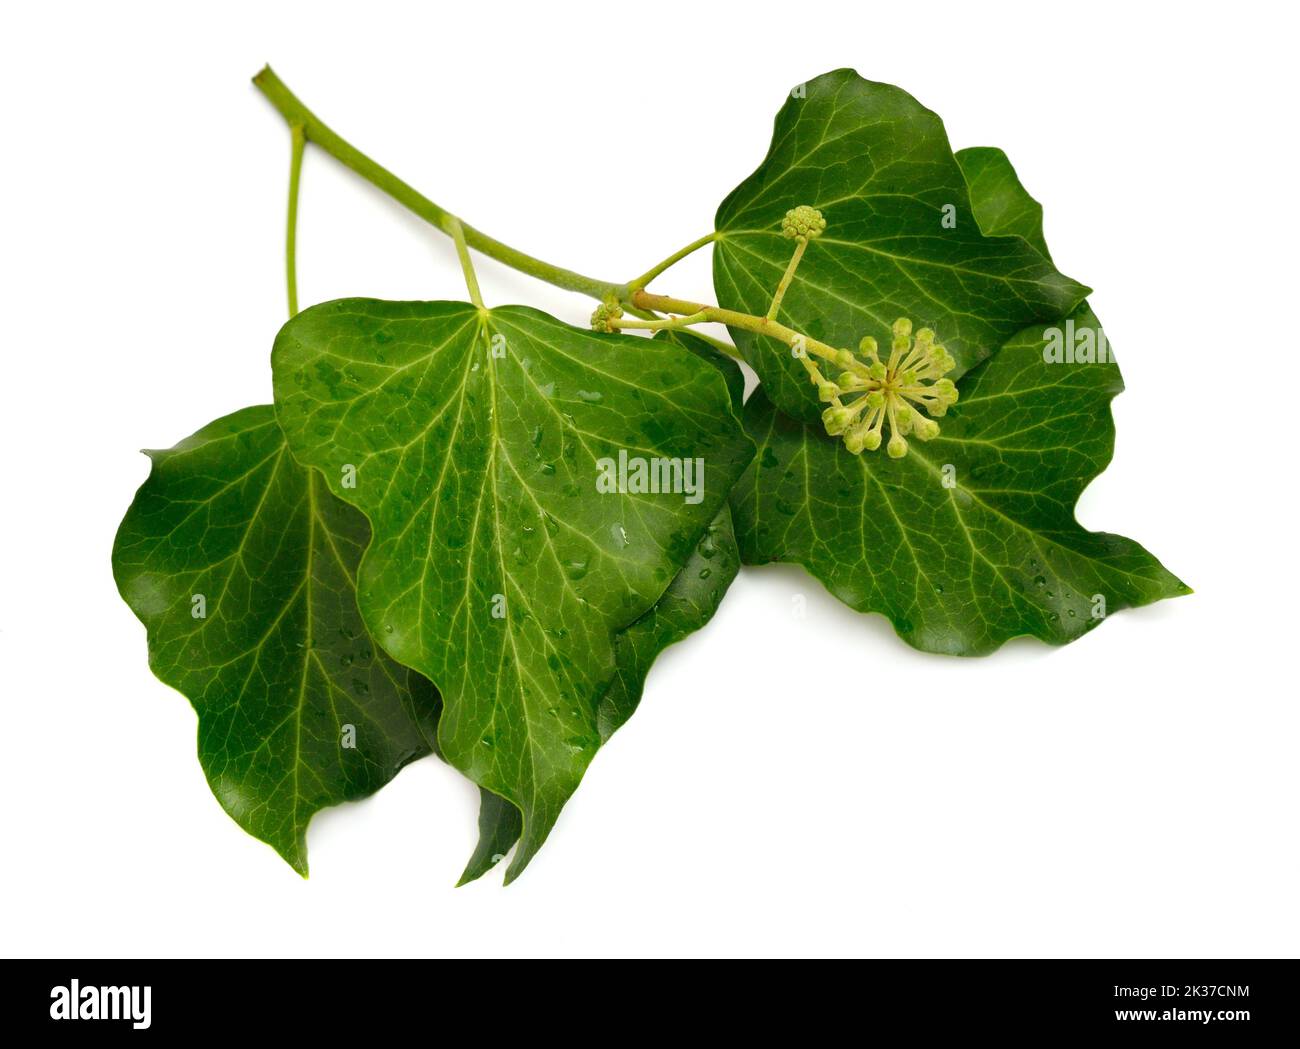 Hedera helix, English ivy, European ivy, or just ivy. Isolated on white background Stock Photo